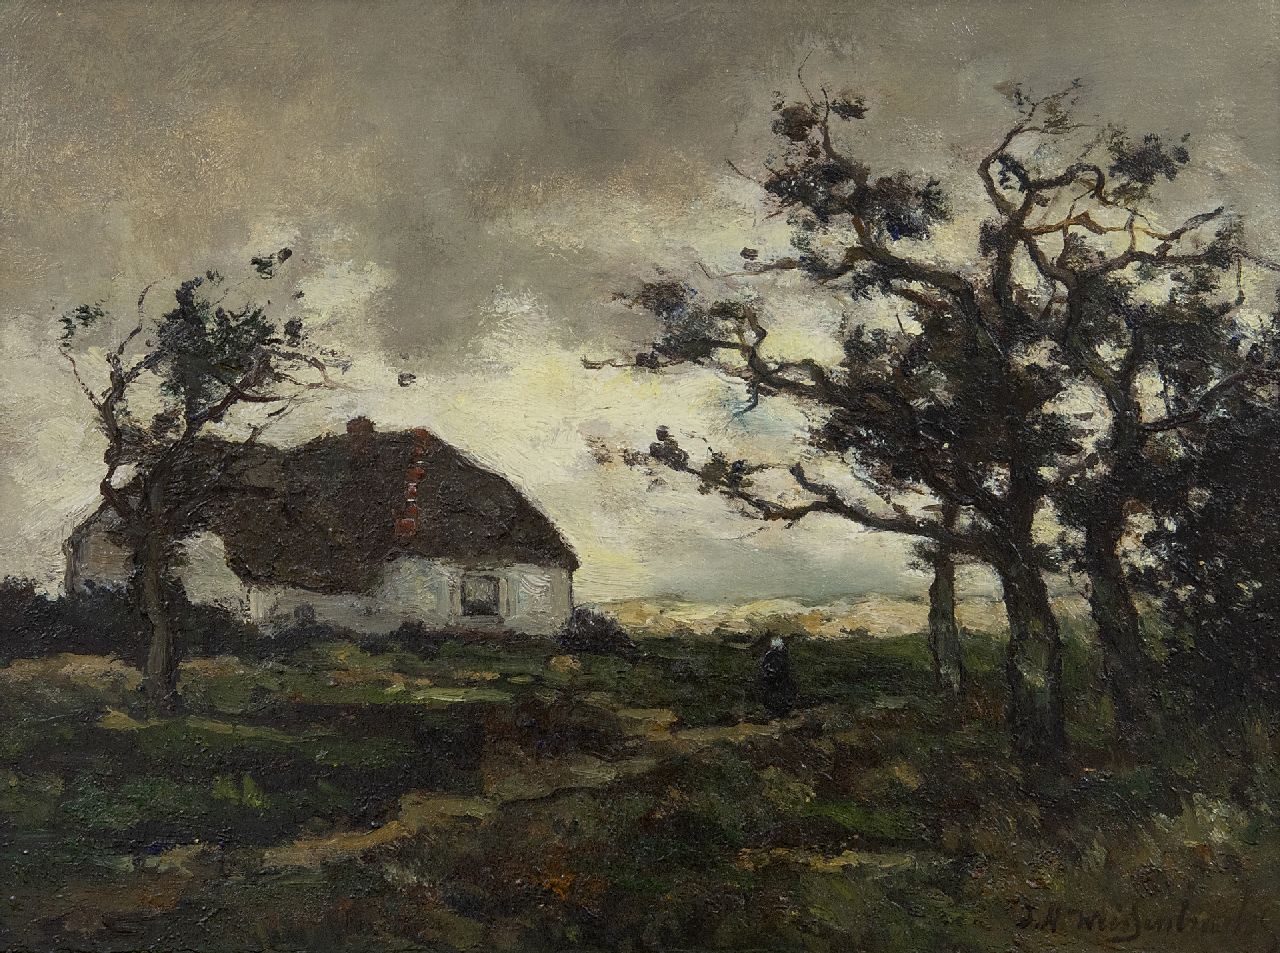 Weissenbruch H.J.  | Hendrik Johannes 'J.H.' Weissenbruch | Paintings offered for sale | Landscape with farmhouse near Dekkersduin, The Hague, oil on paper laid down on panel 23.2 x 31.1 cm, signed l.r.